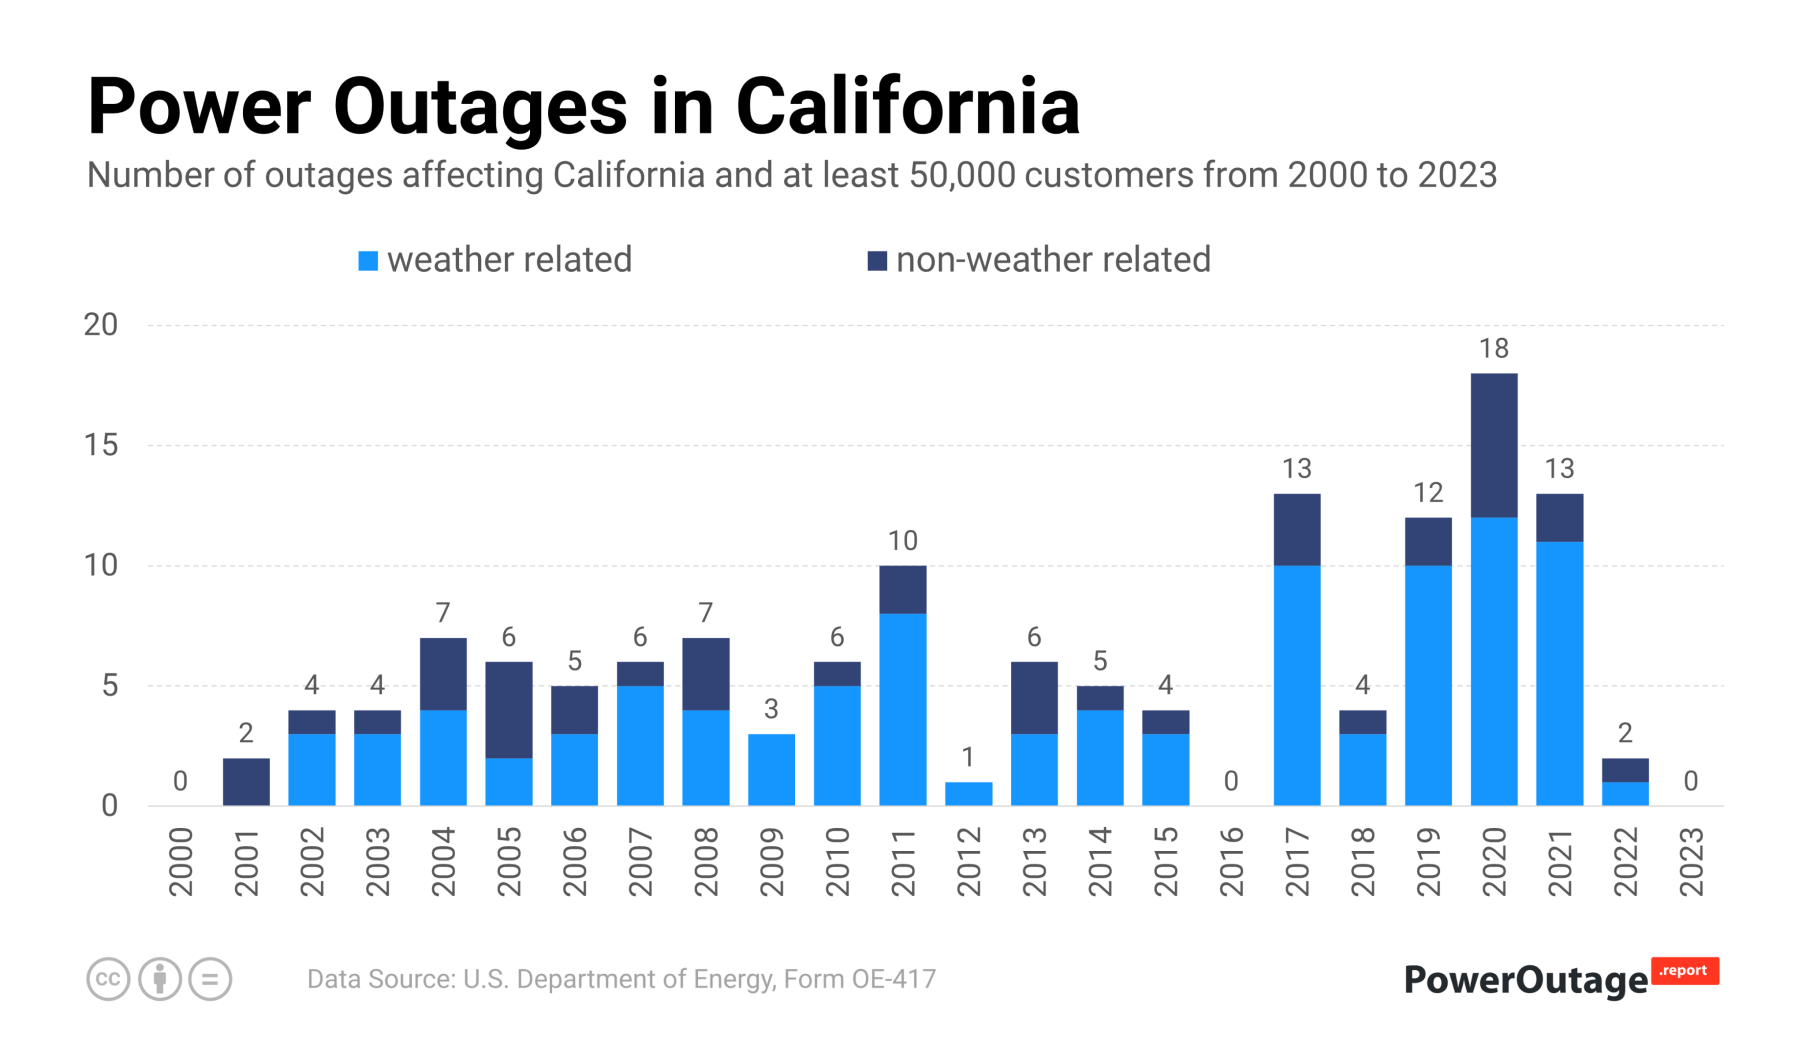 California Power Outage Statistics (2000 - 2021)